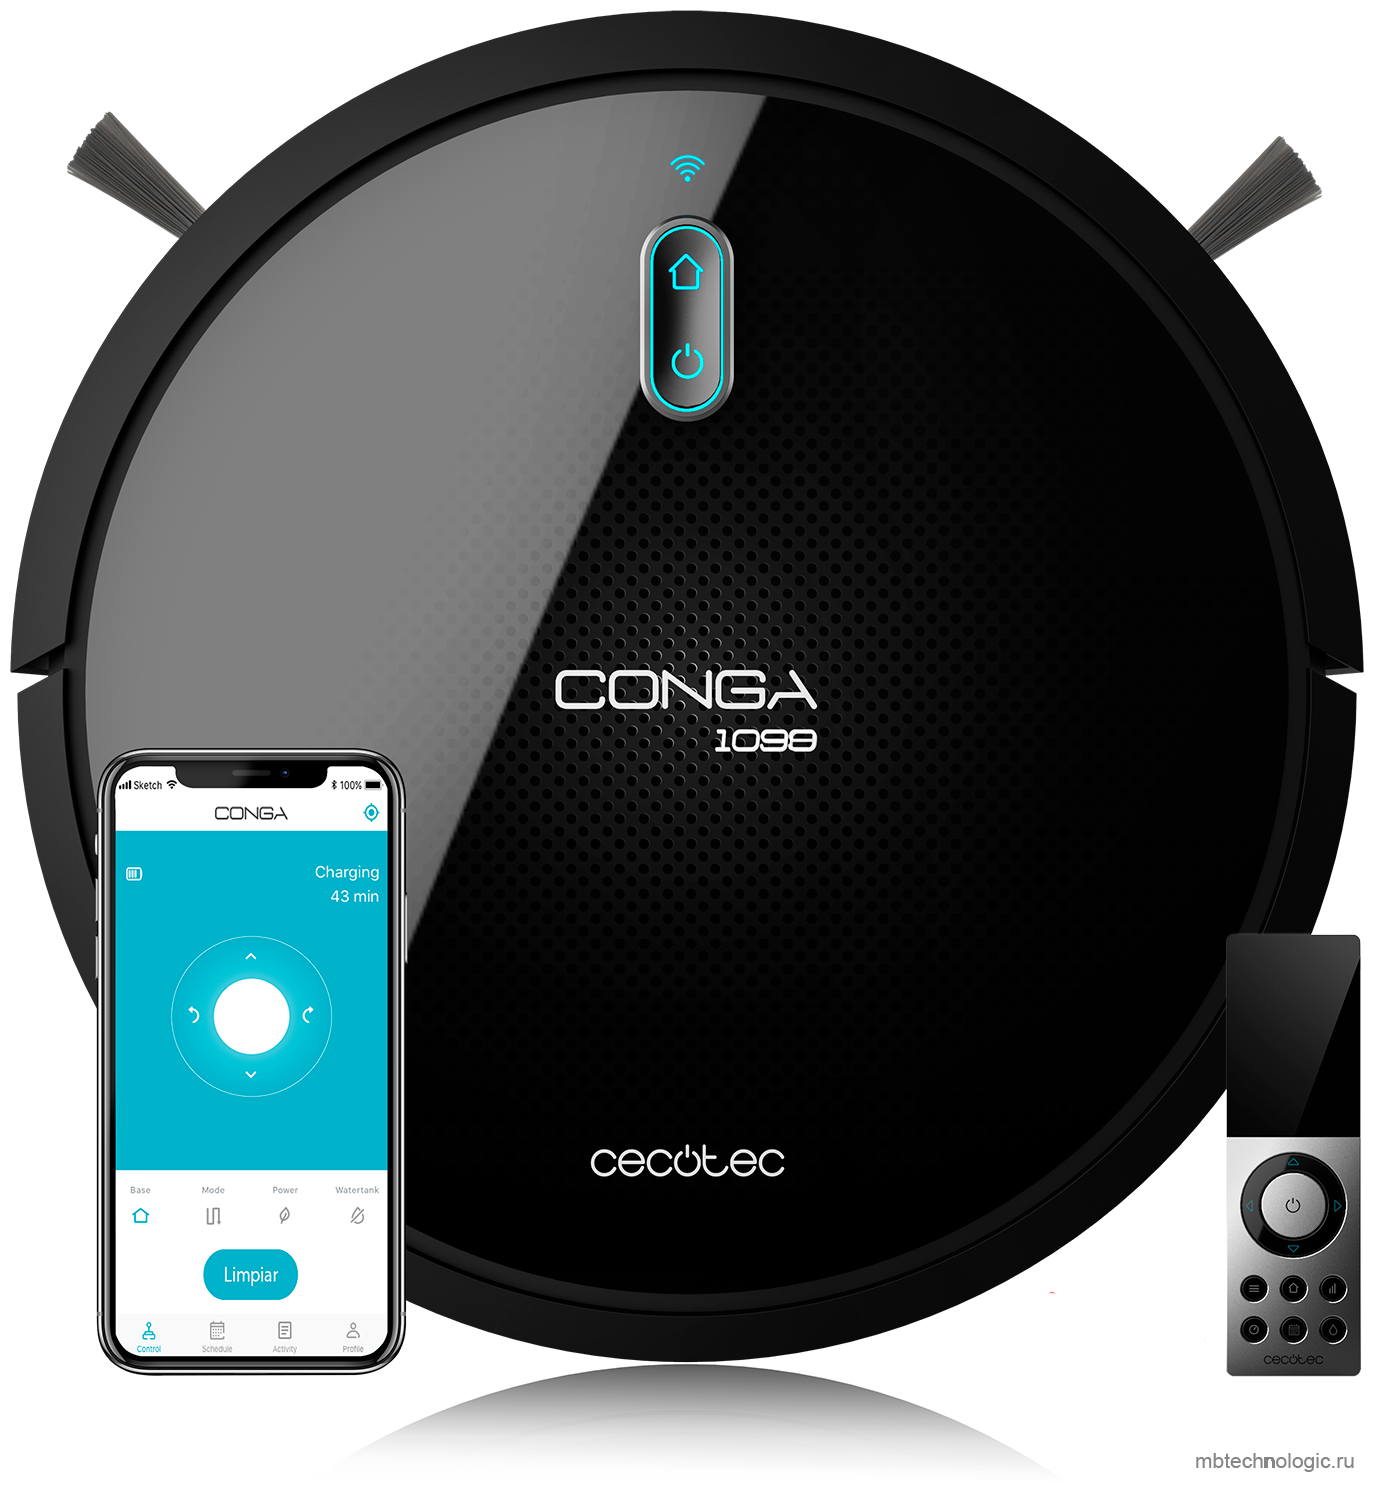 Conga Serie 1099 Connected (05411)